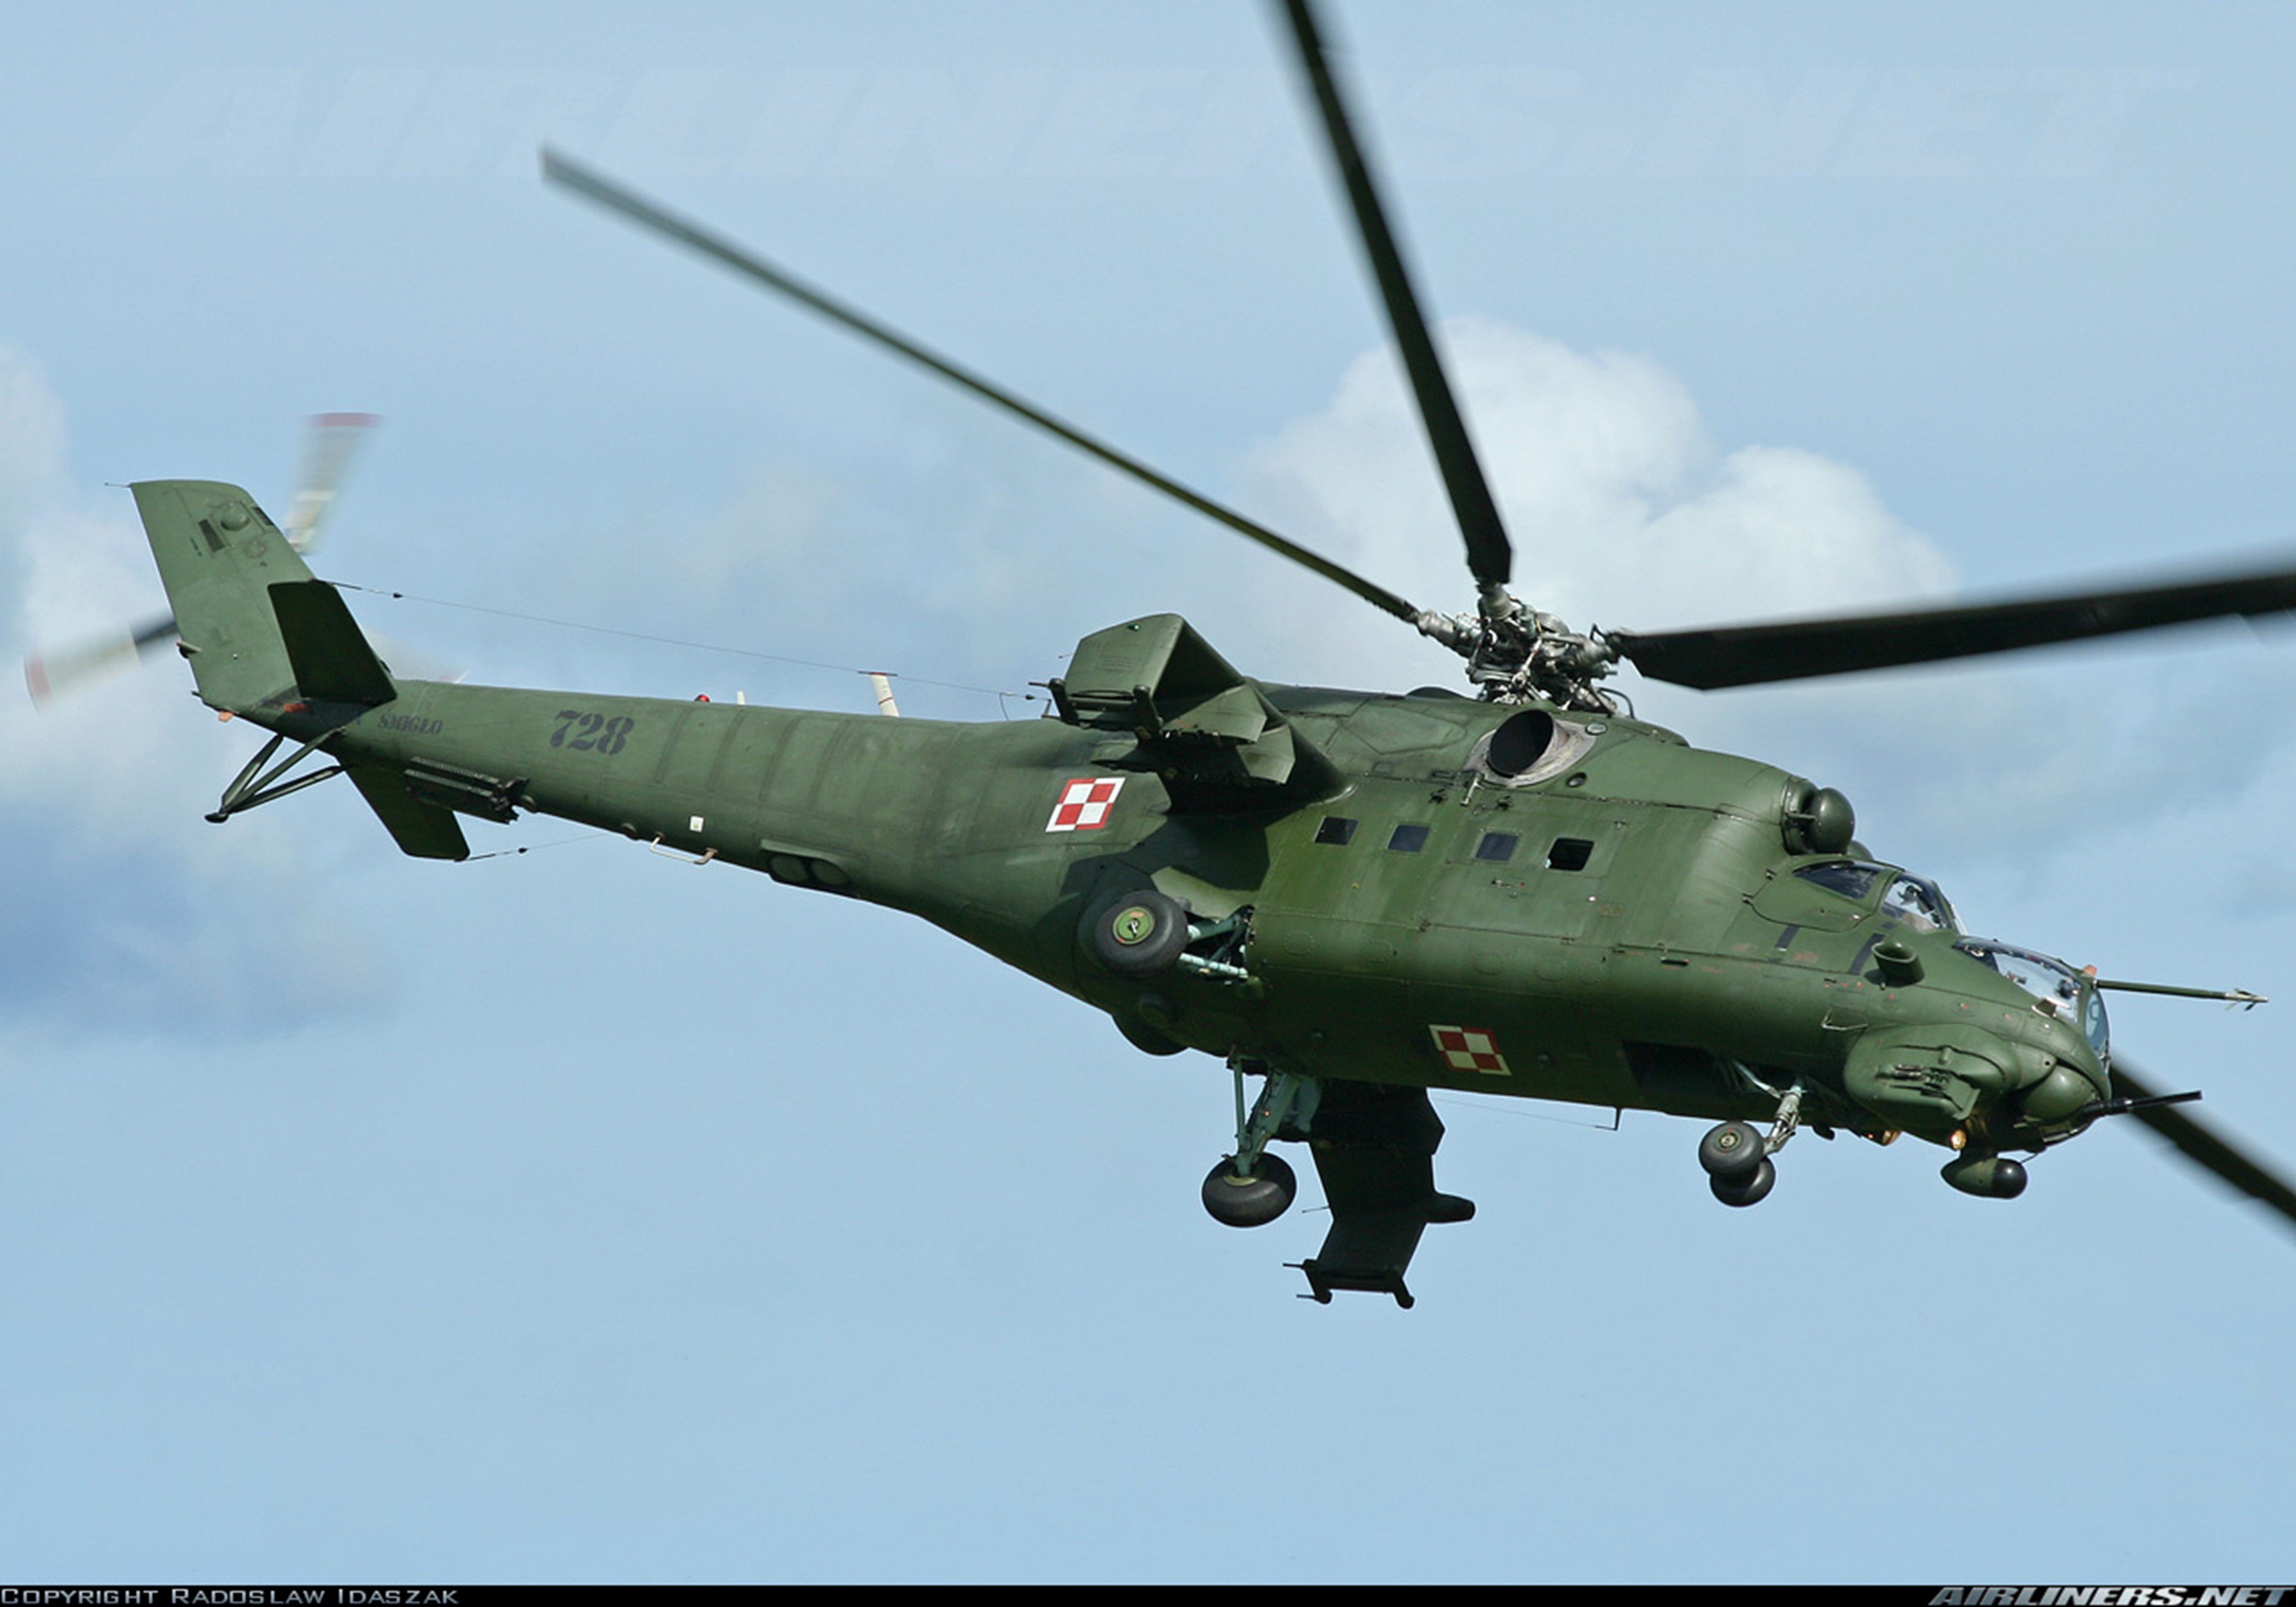 helicopter, Aircraft, Vehicle, Military, Army, Attack, Mil mi, Poland Wallpaper